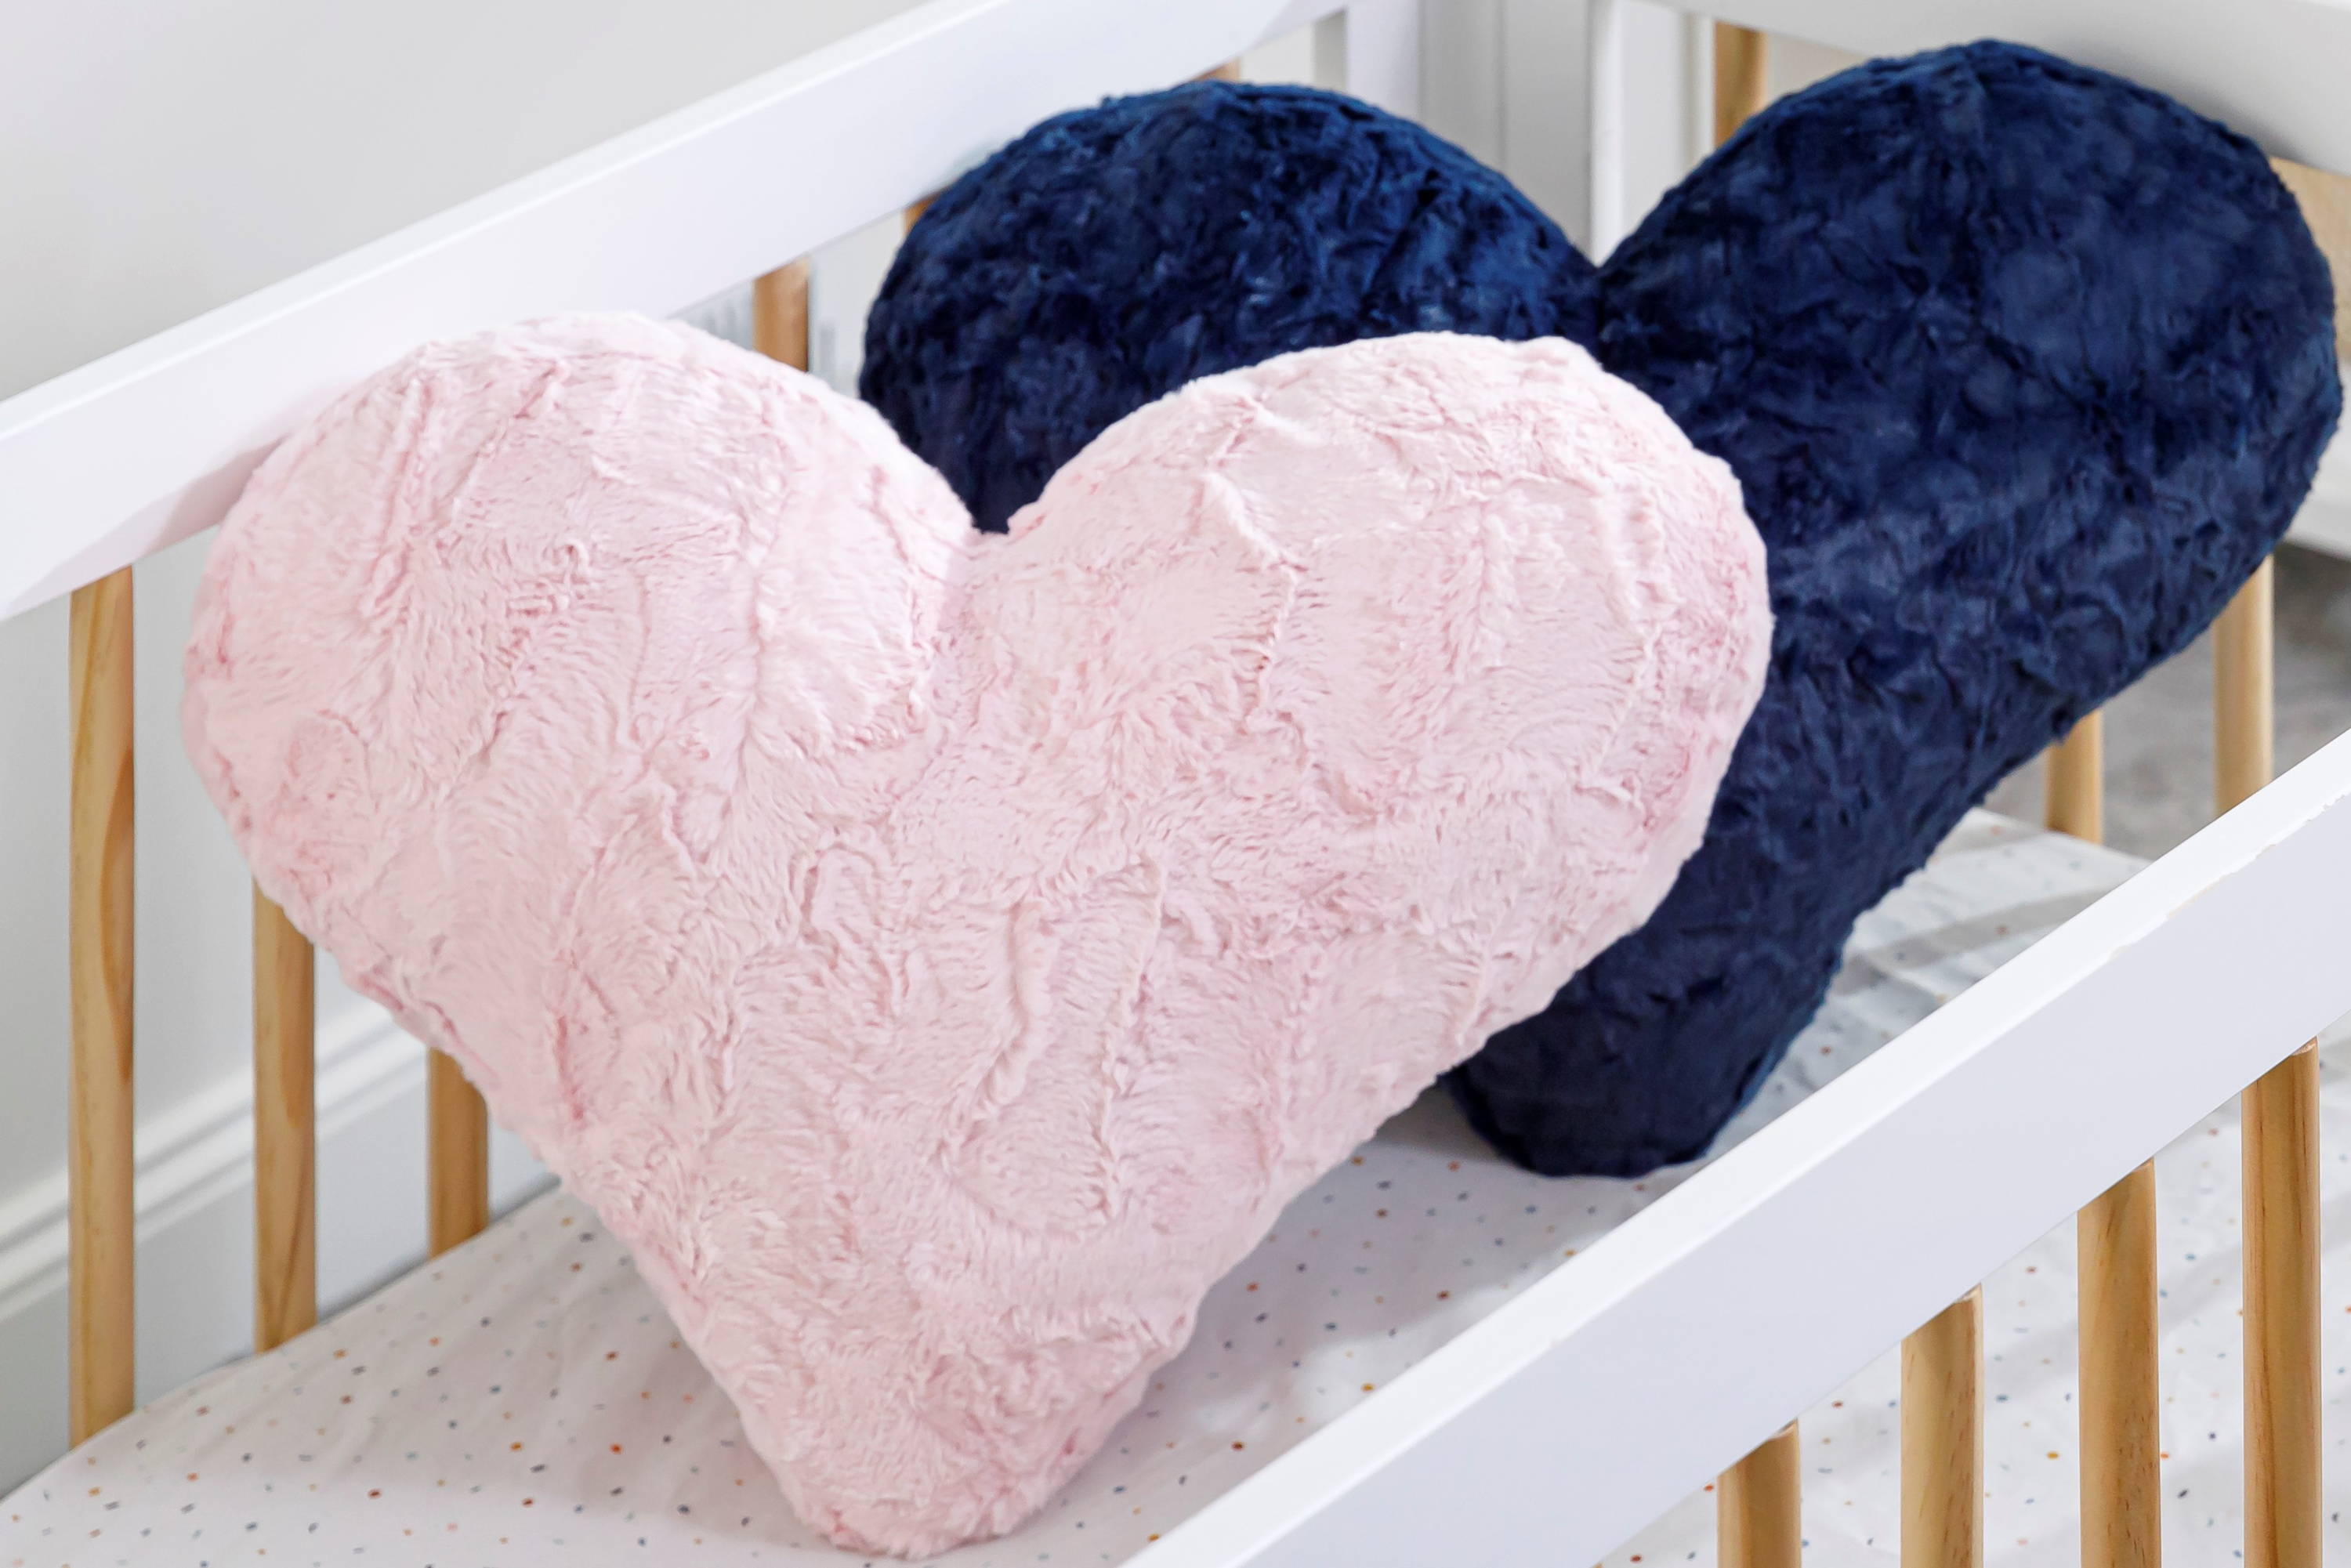 Cuddle heart pillow sewing project for Valentine's day